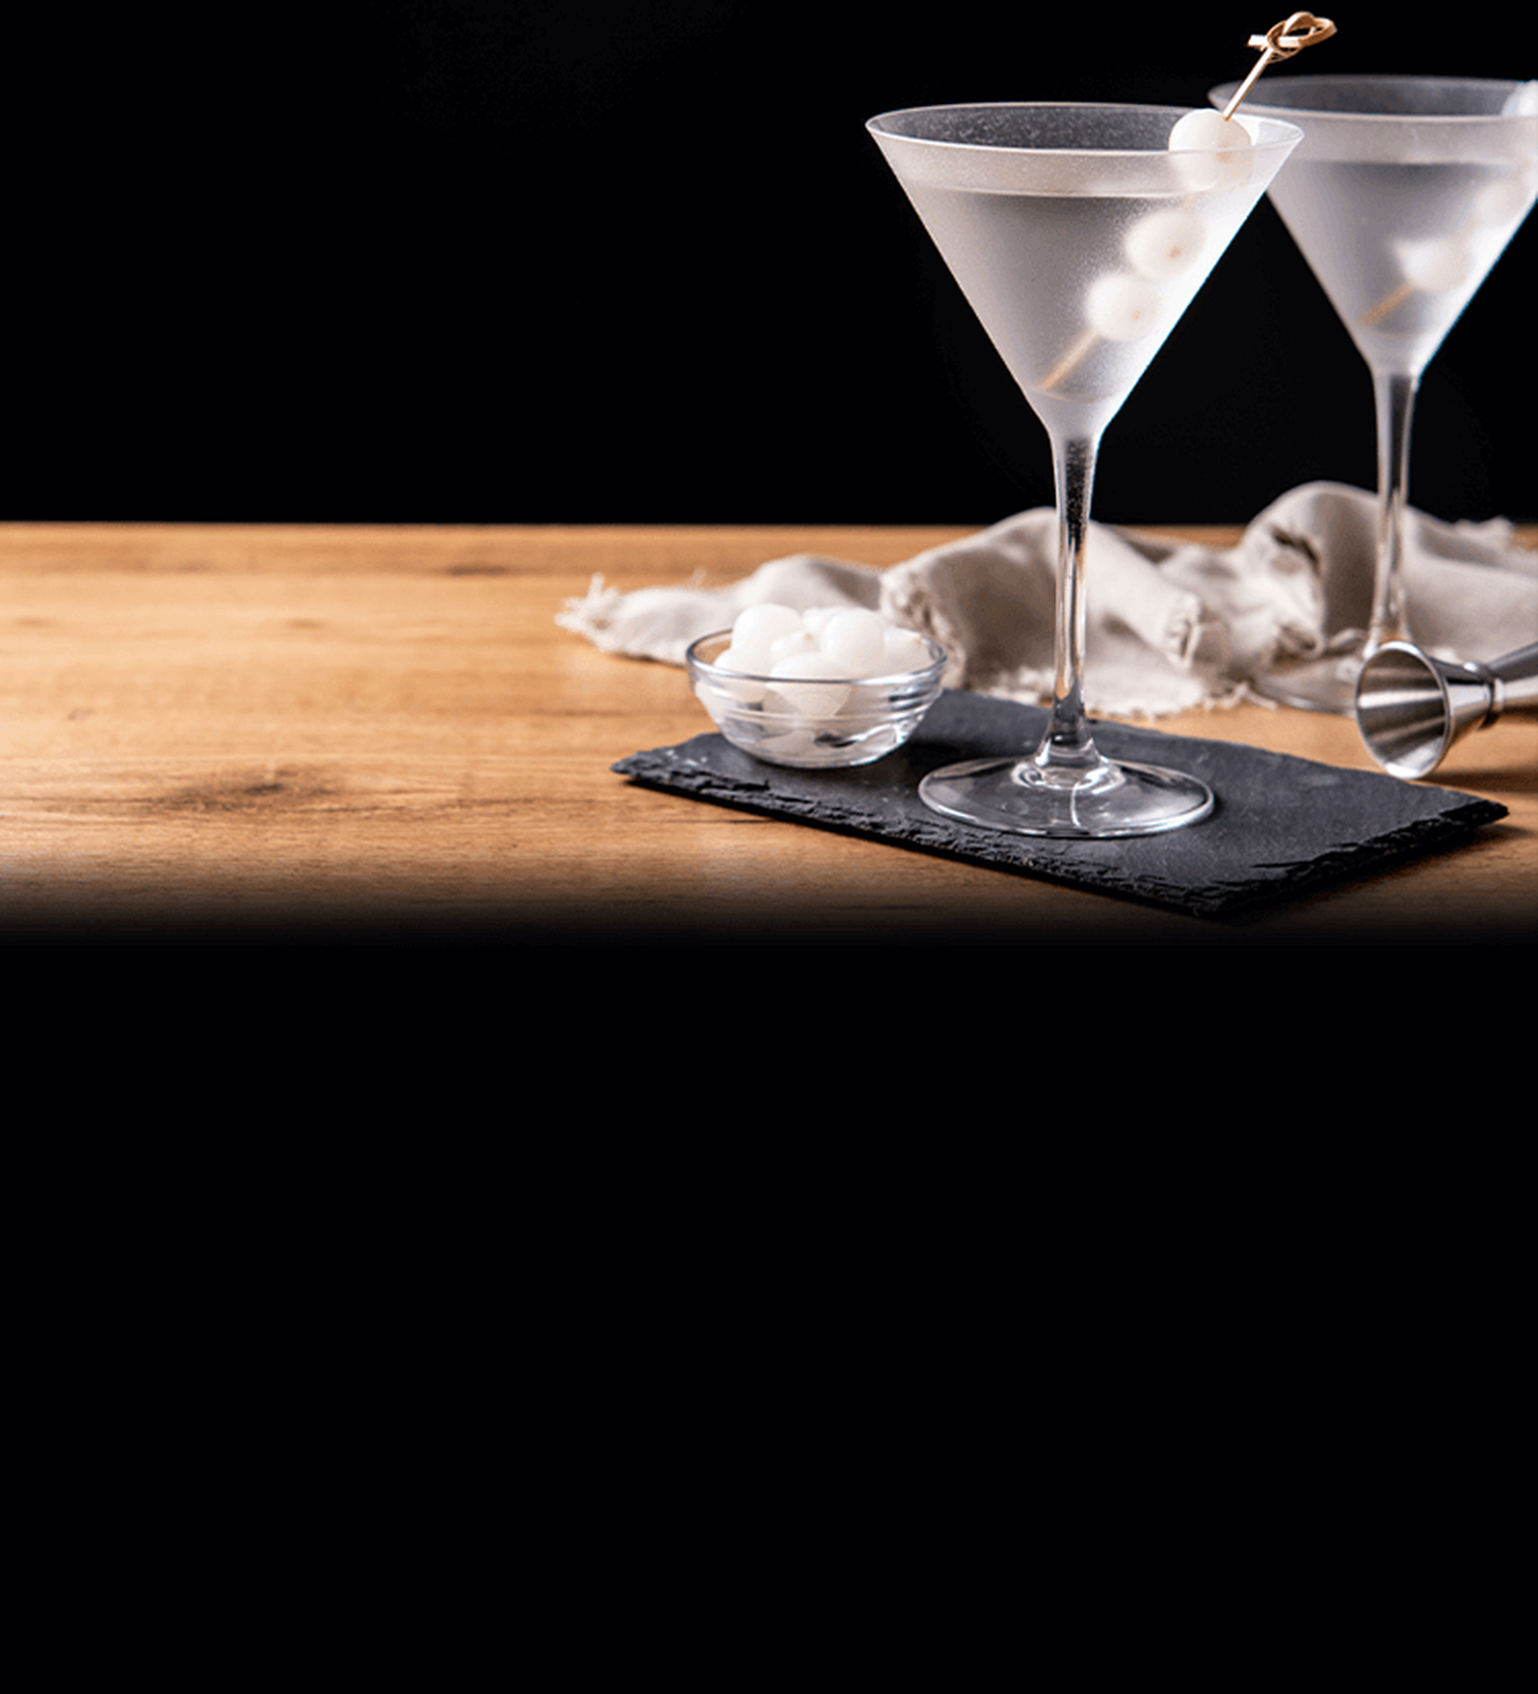 Image of a Gibson martini on a butcher block counter